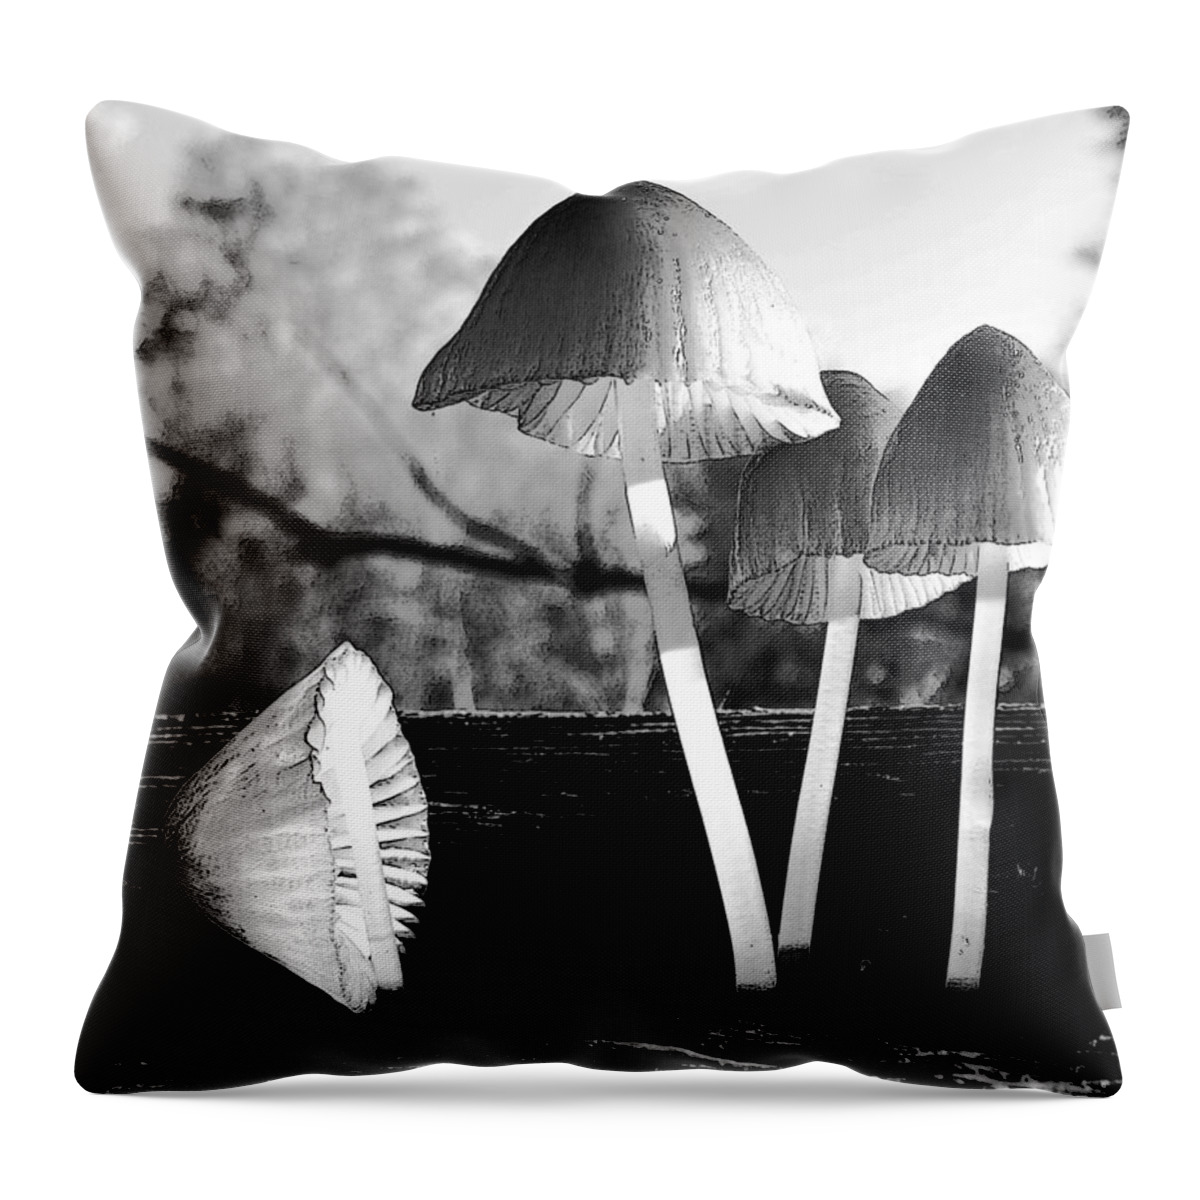 Bw Mushroom Still Life Throw Pillow featuring the photograph Autumn Belles by I'ina Van Lawick